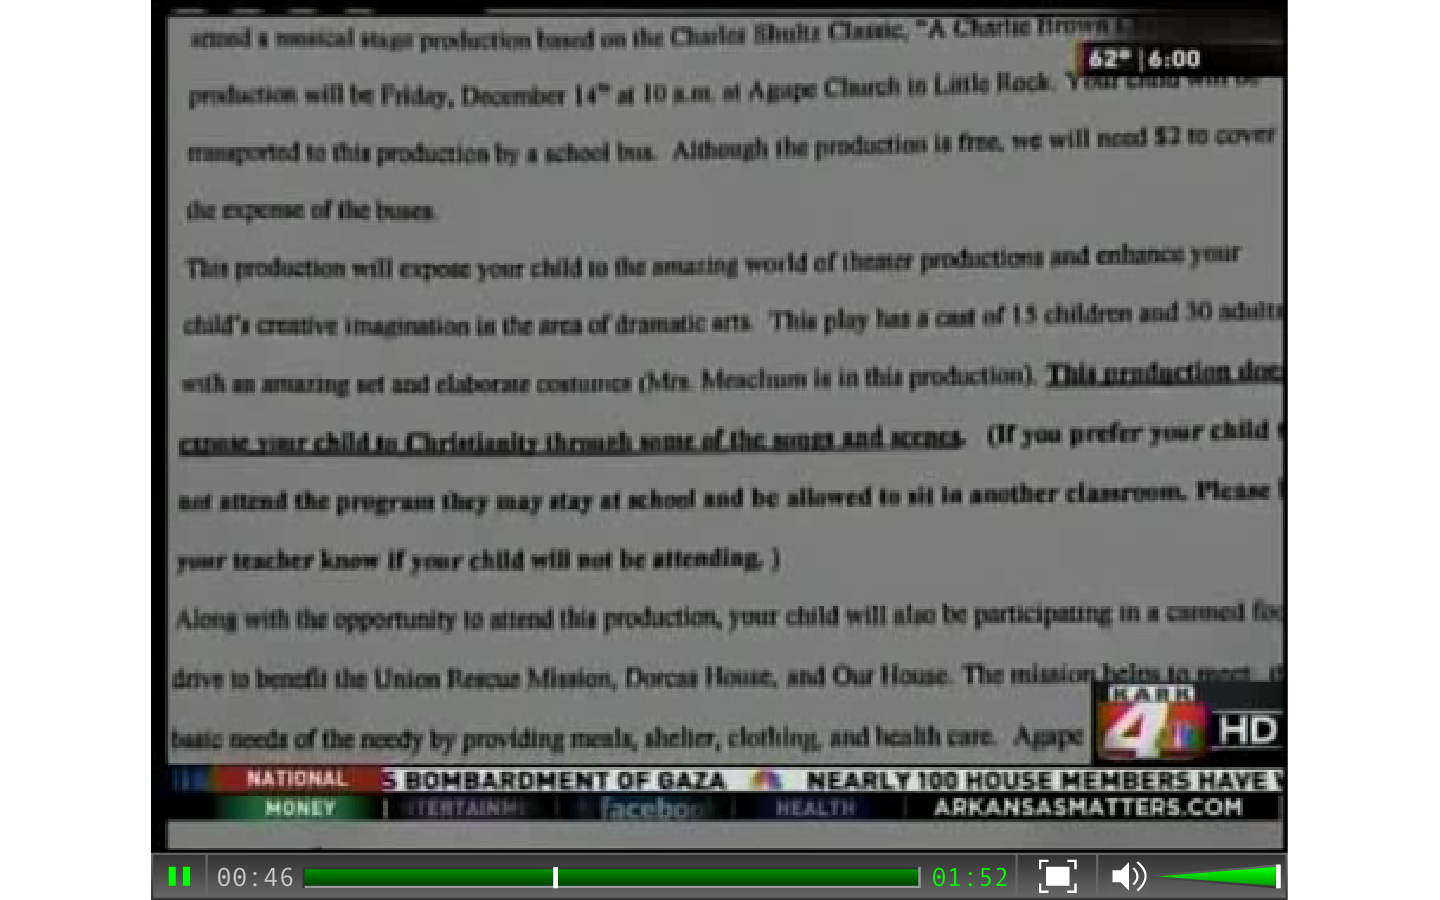 Atheist Group Objects to Elementary School Taking Kids to See ‘A Charlie Brown Christmas’ at Local Church